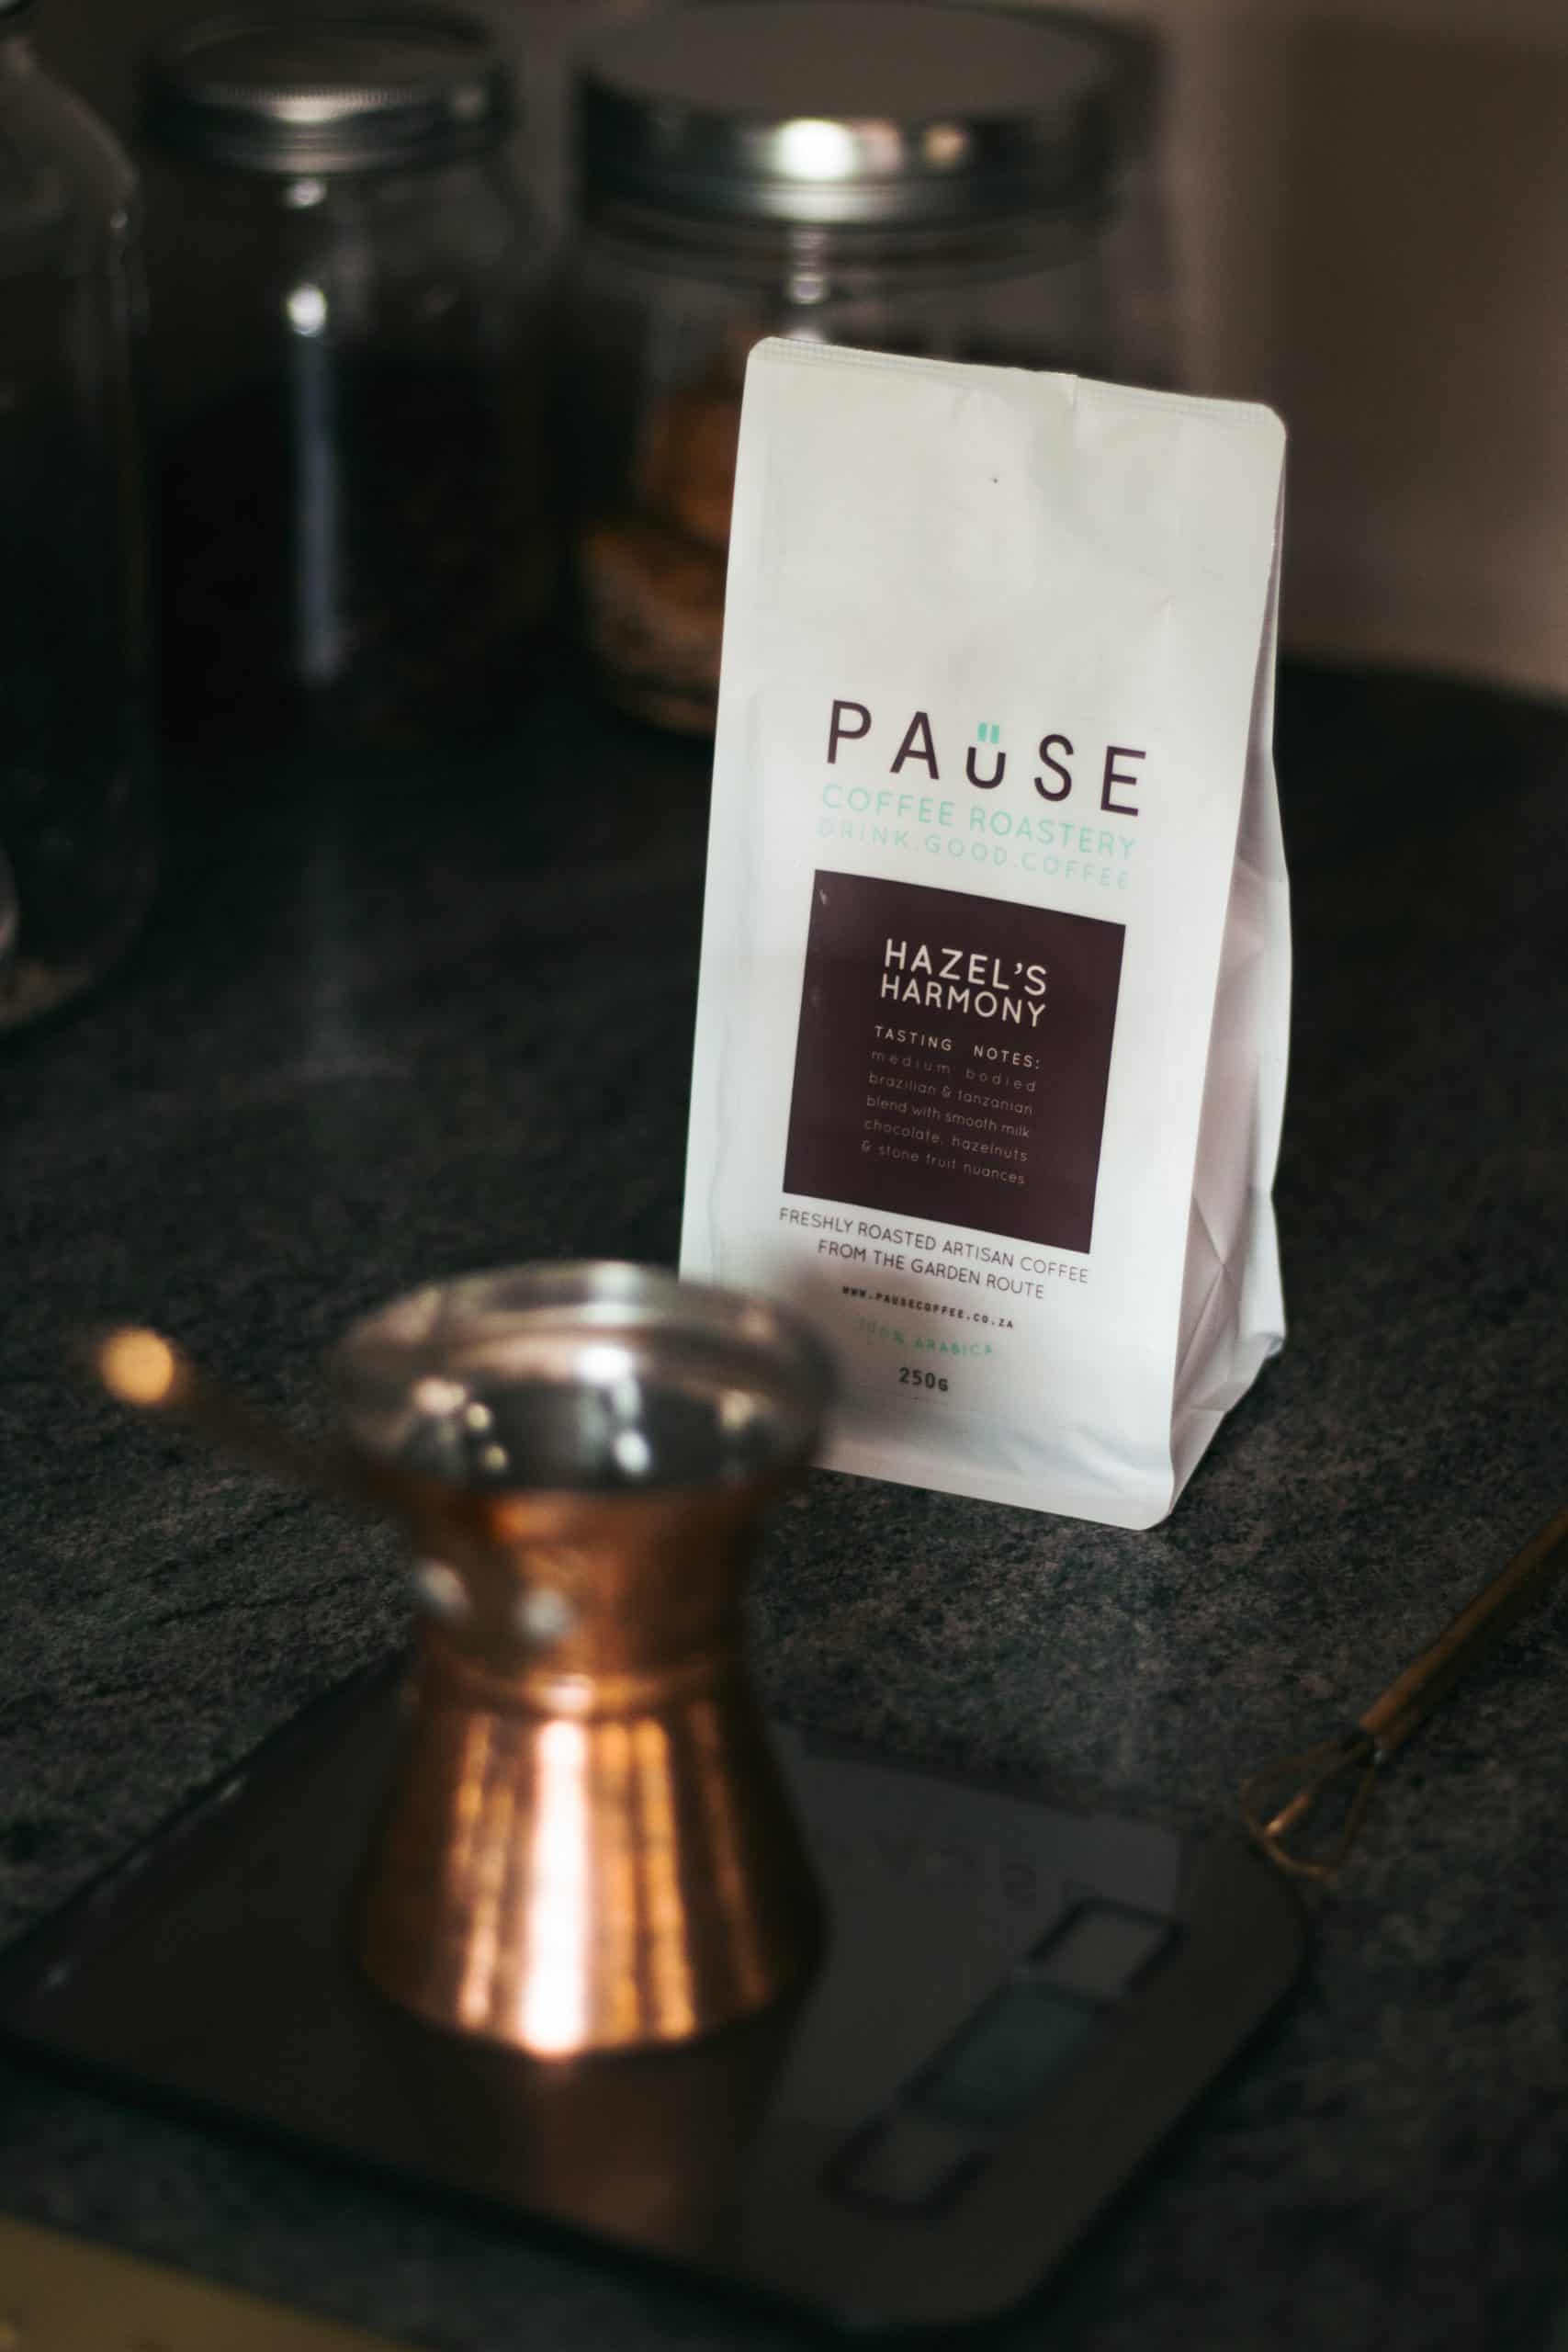 Pause Coffee Beans